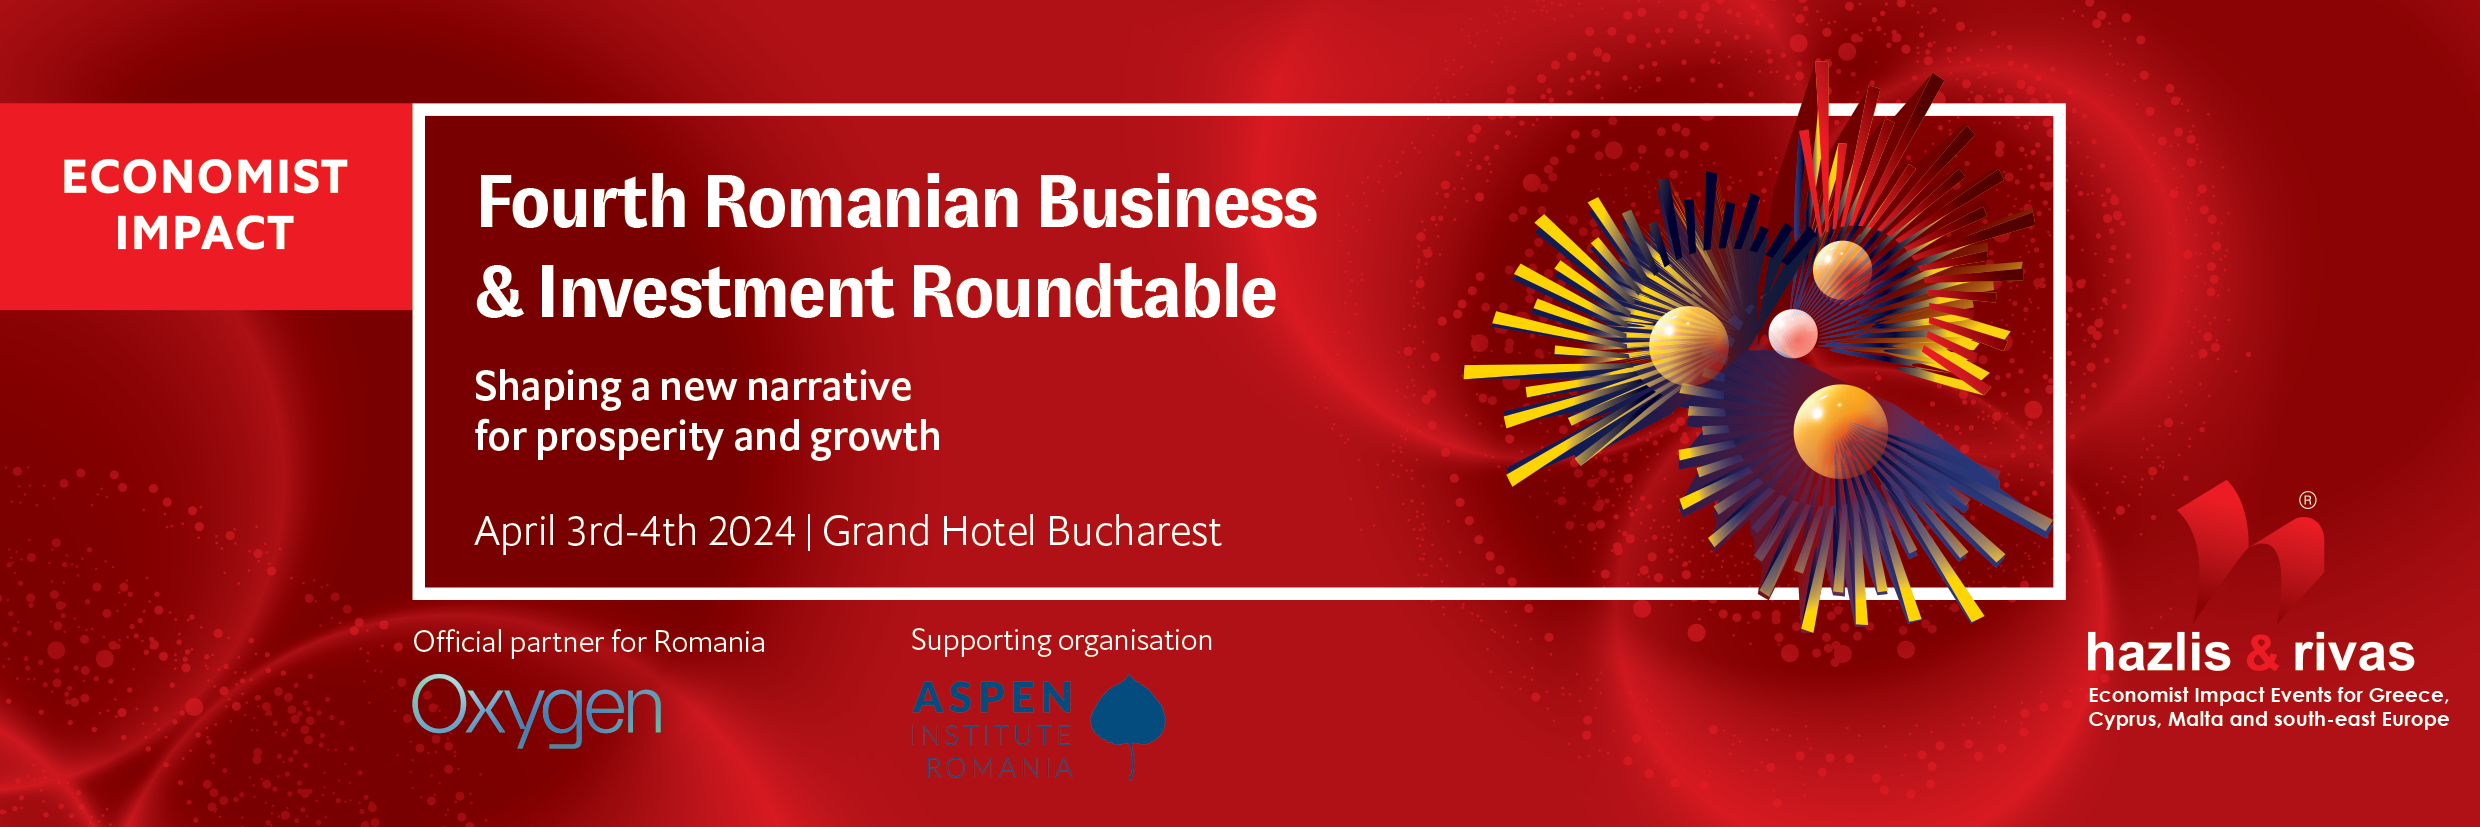 The Economist Impact Events presents the fourth edition of the Romanian Business & Investment Roundtable Conference in Bucharest, between April 3-4, 2024